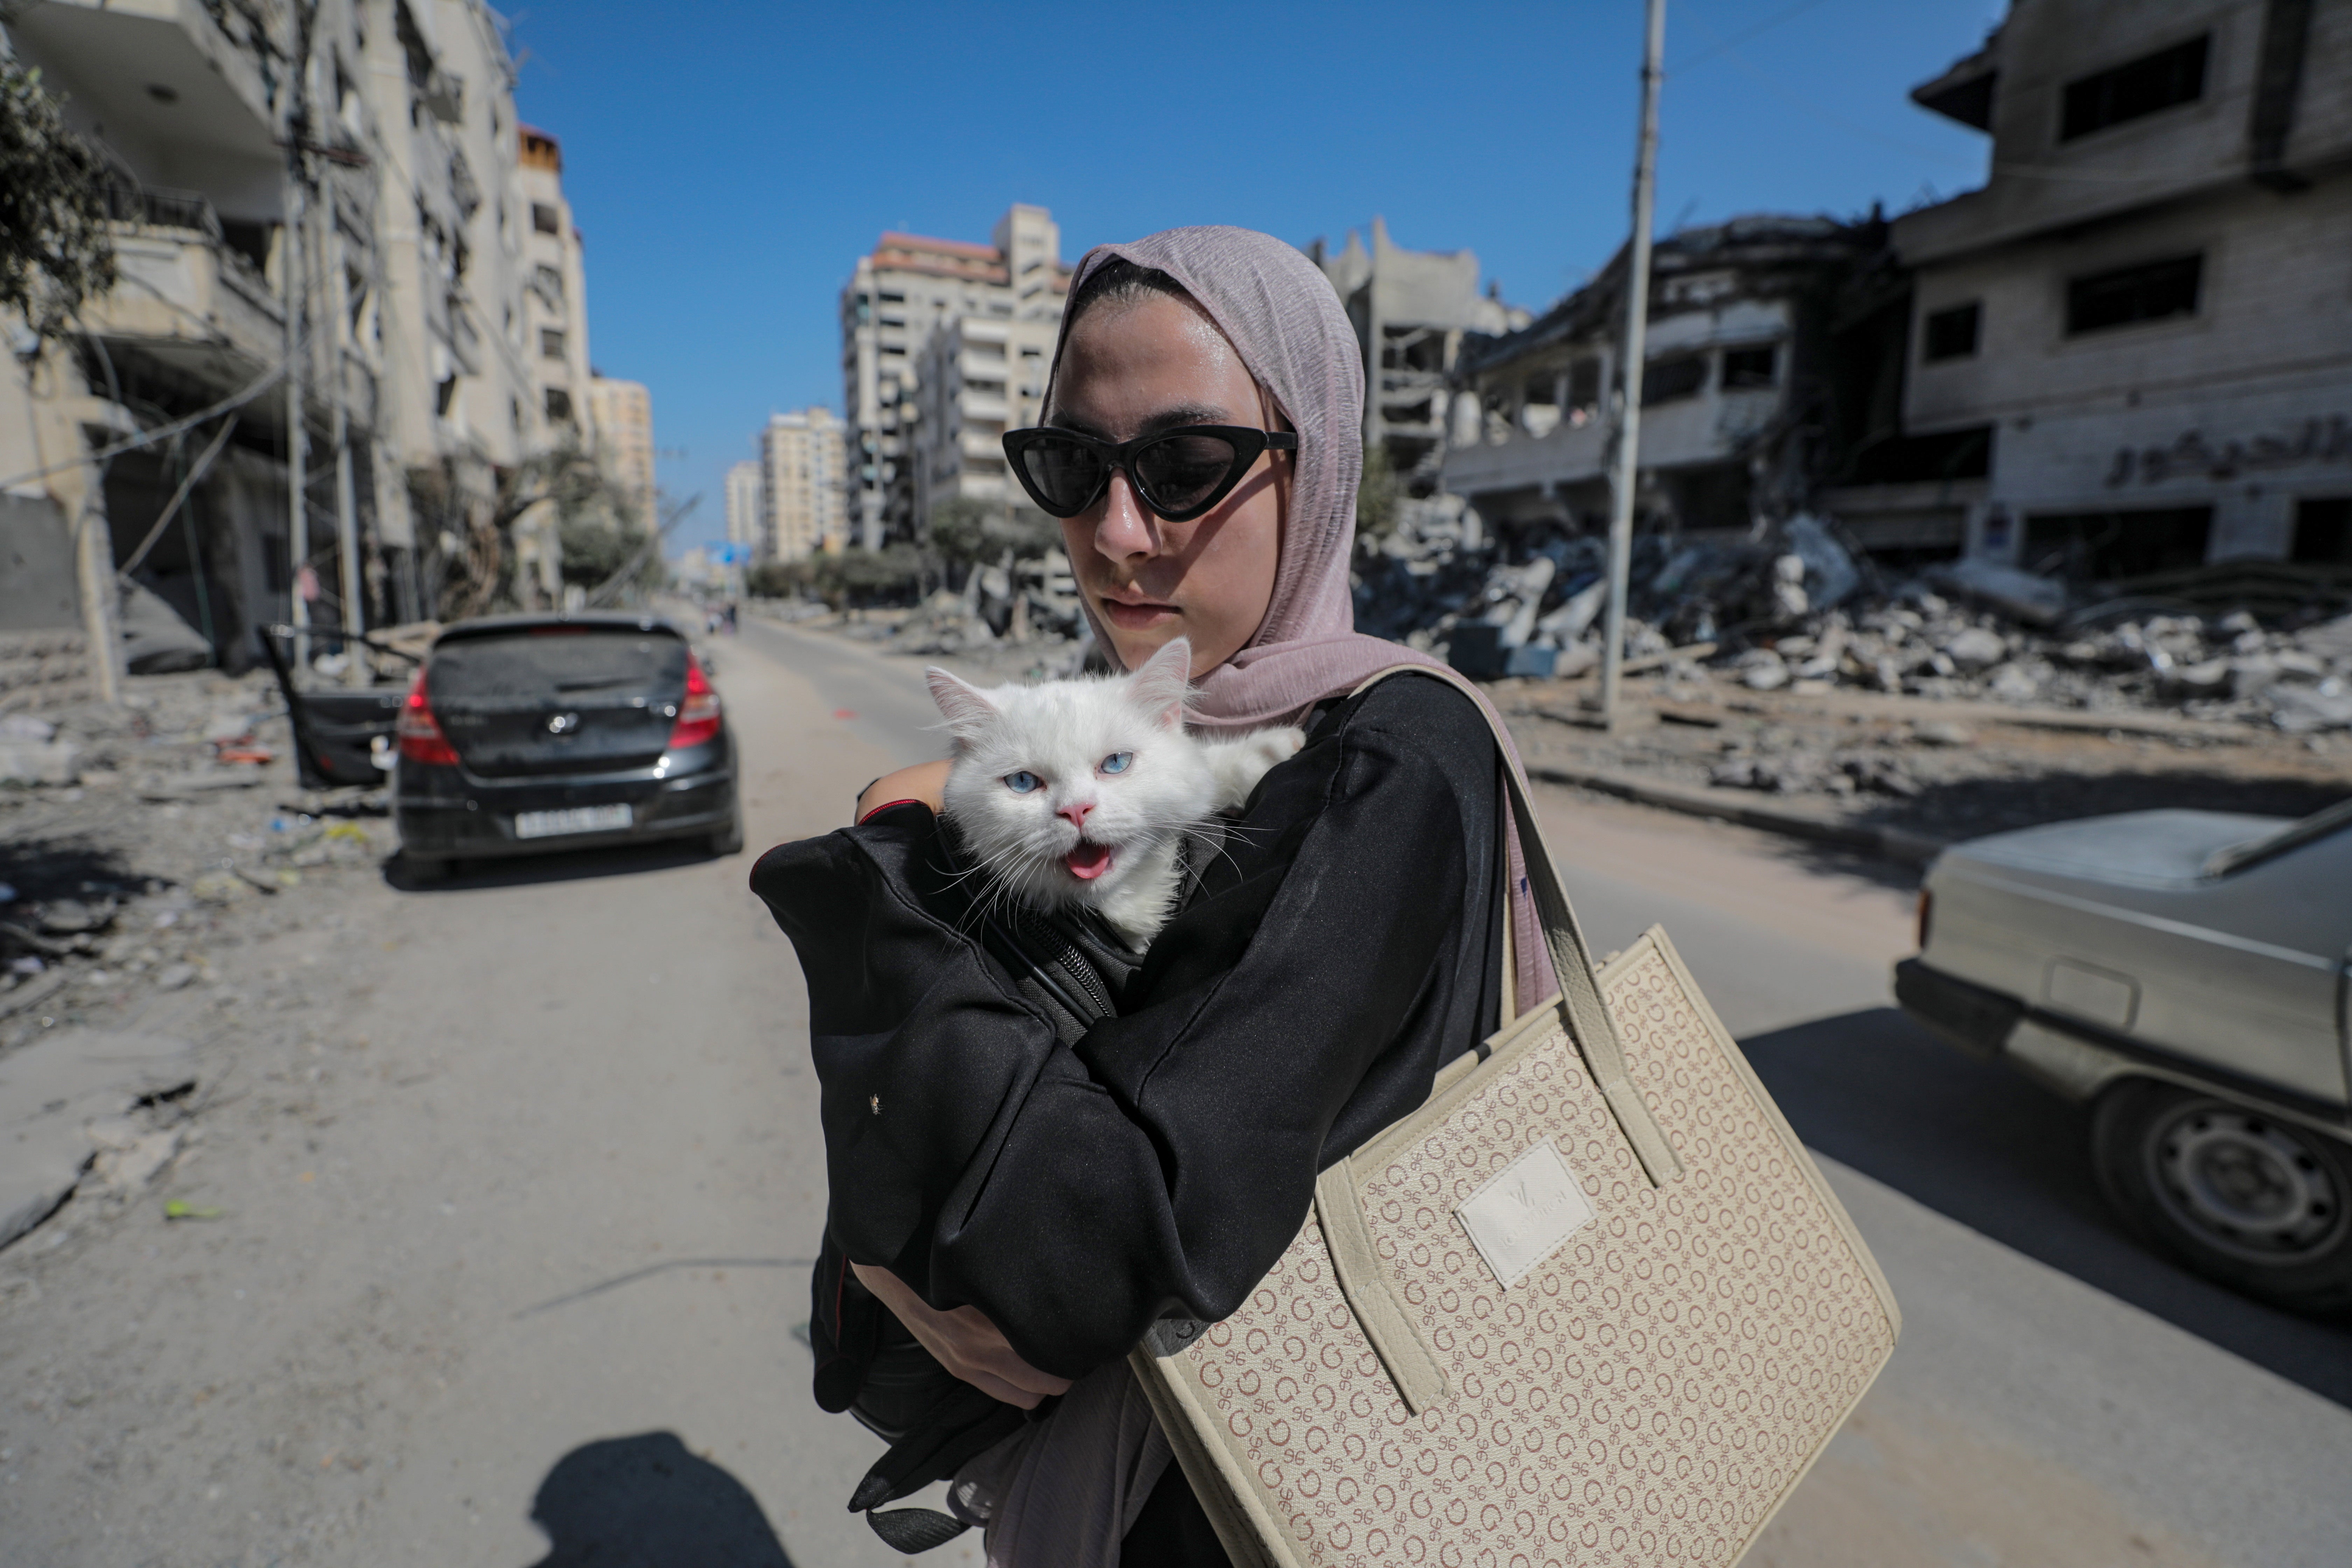 A resident of Gaza City prepares to evacuate following an Israeli warning of increased military operations